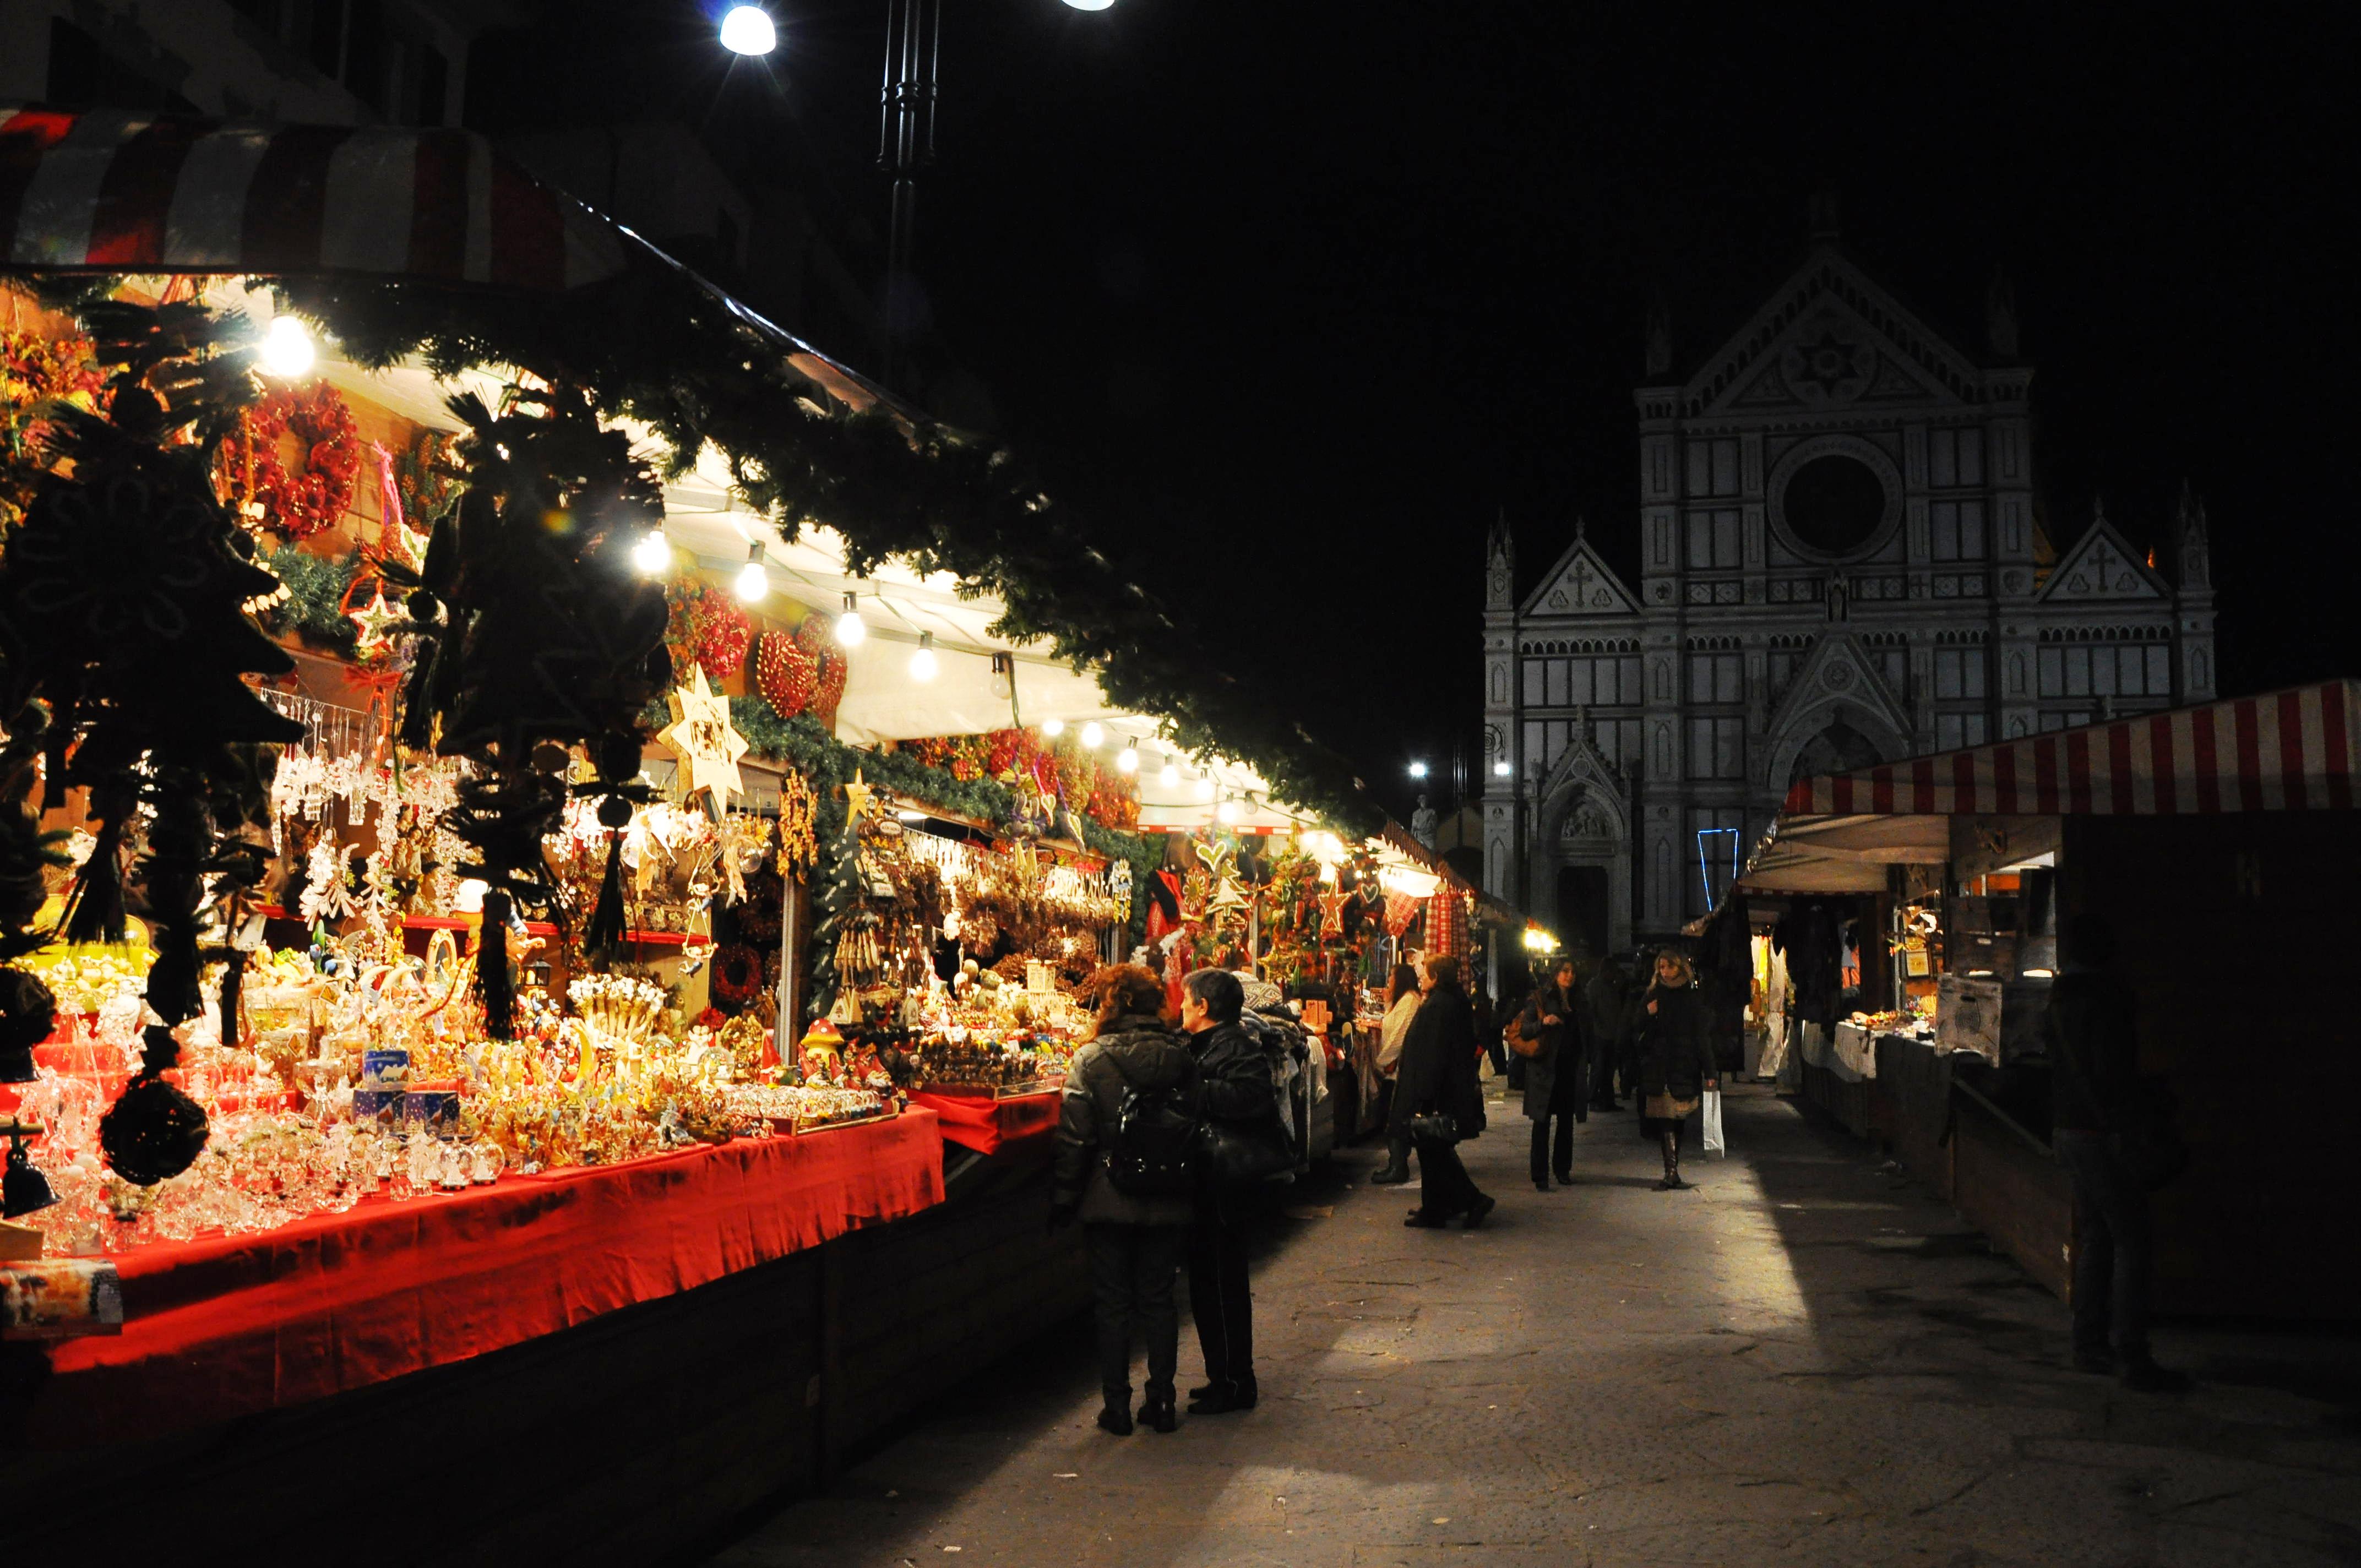 December in cities like Florence comes with perks, including Christmas markets!